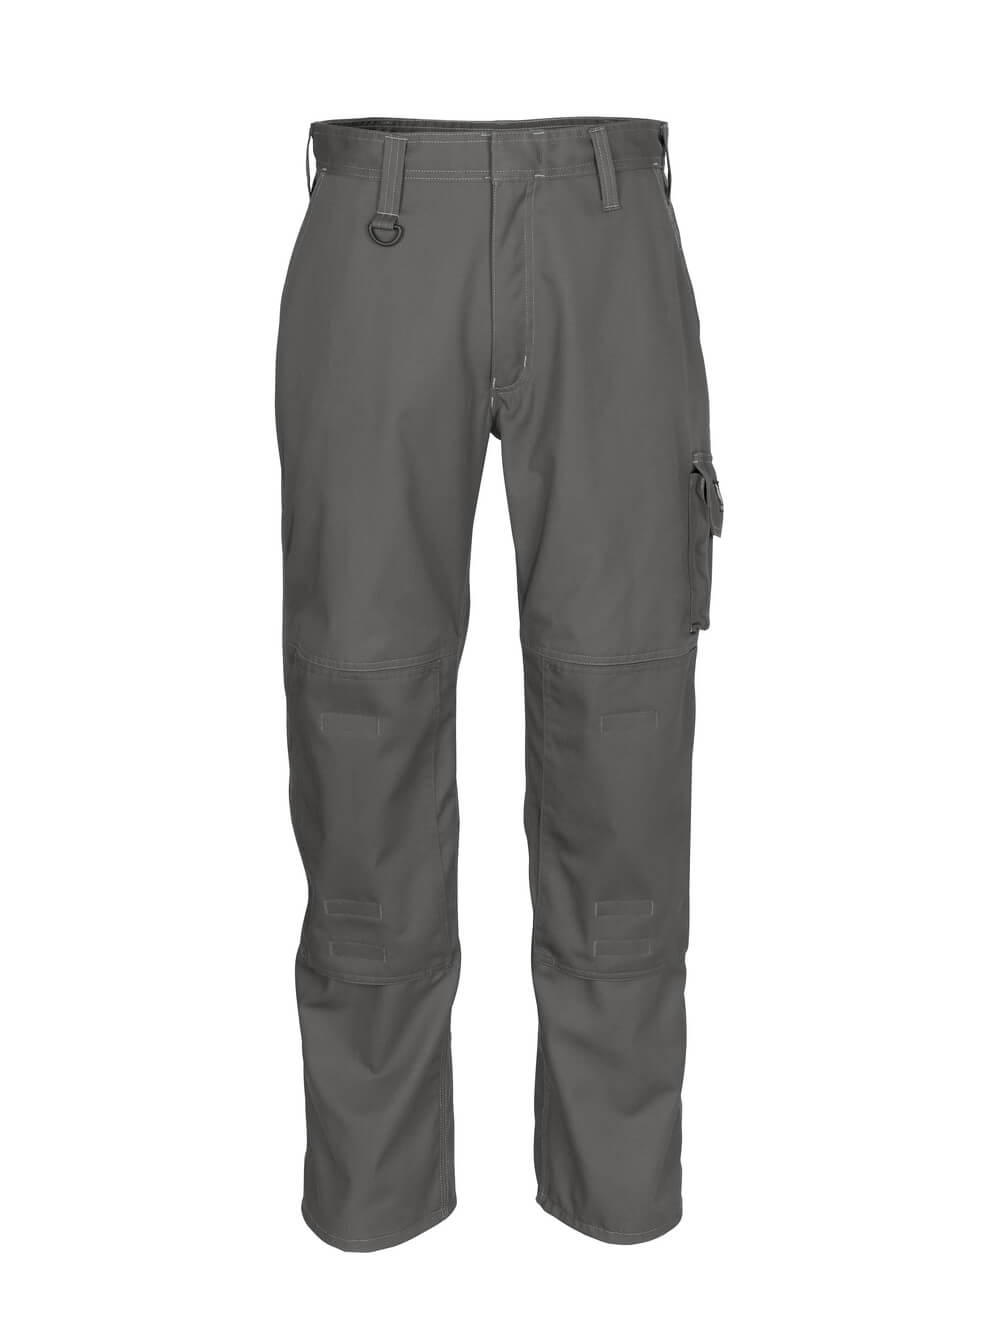 MASCOT® Pittsburgh INDUSTRY Trousers with kneepad pockets 10579